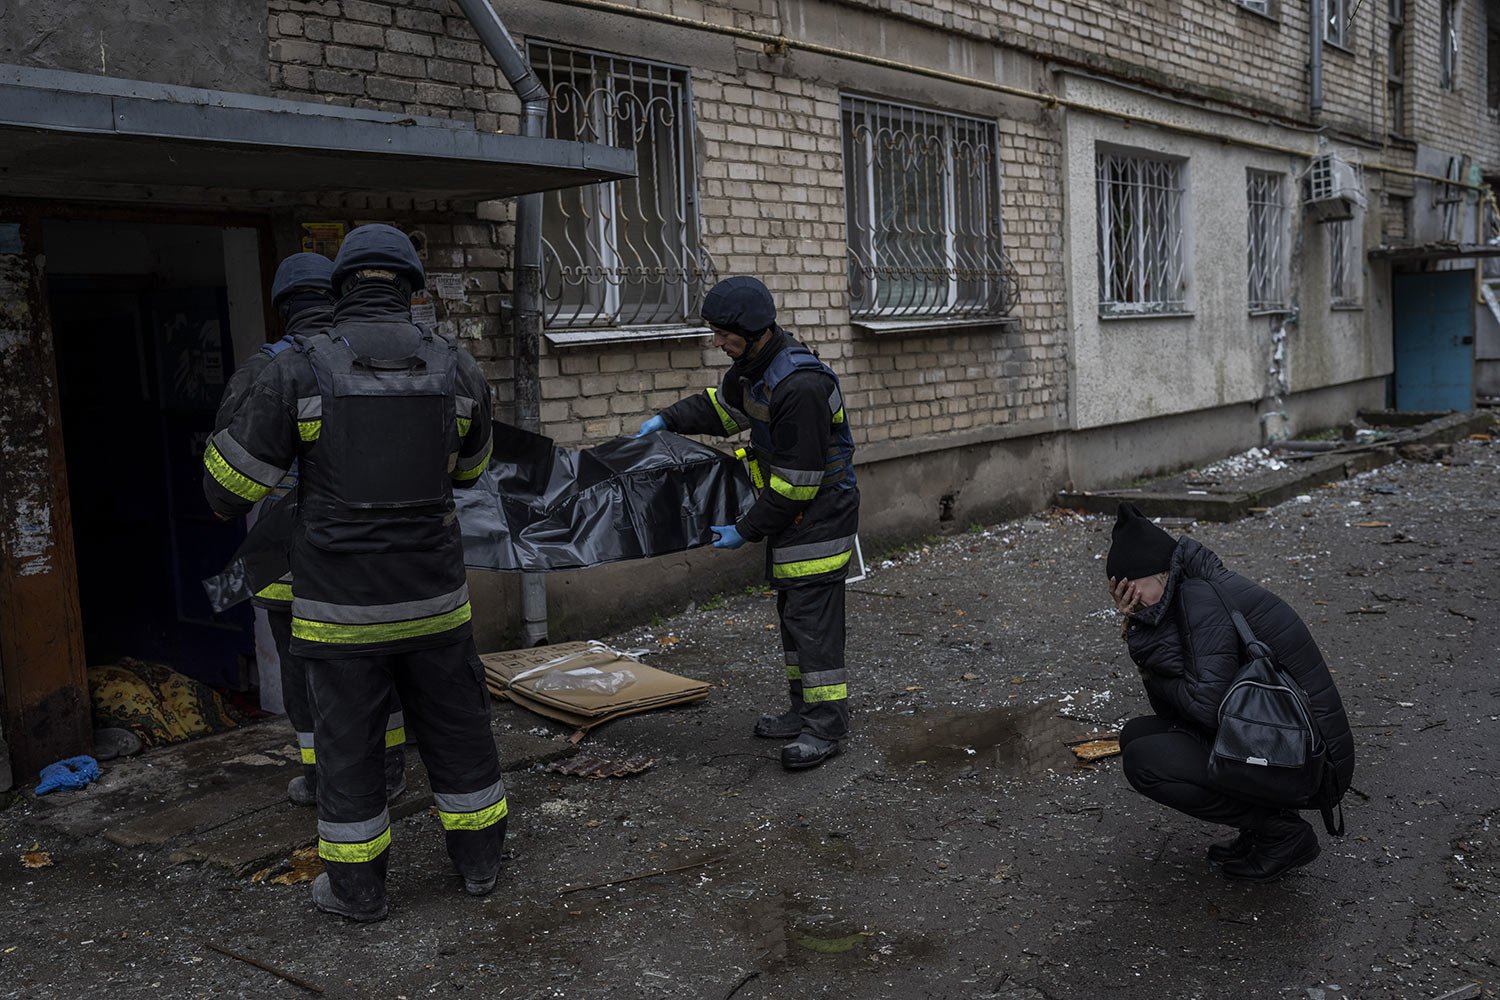  Lilia Kristenko cries as city responders collect the body of her mother Natalia in Kherson, southern Ukraine, Nov. 25, 2022. Natalia's corpse laid covered with a blanket in the doorway of her apartment building for hours overnight. The 62-year-old w